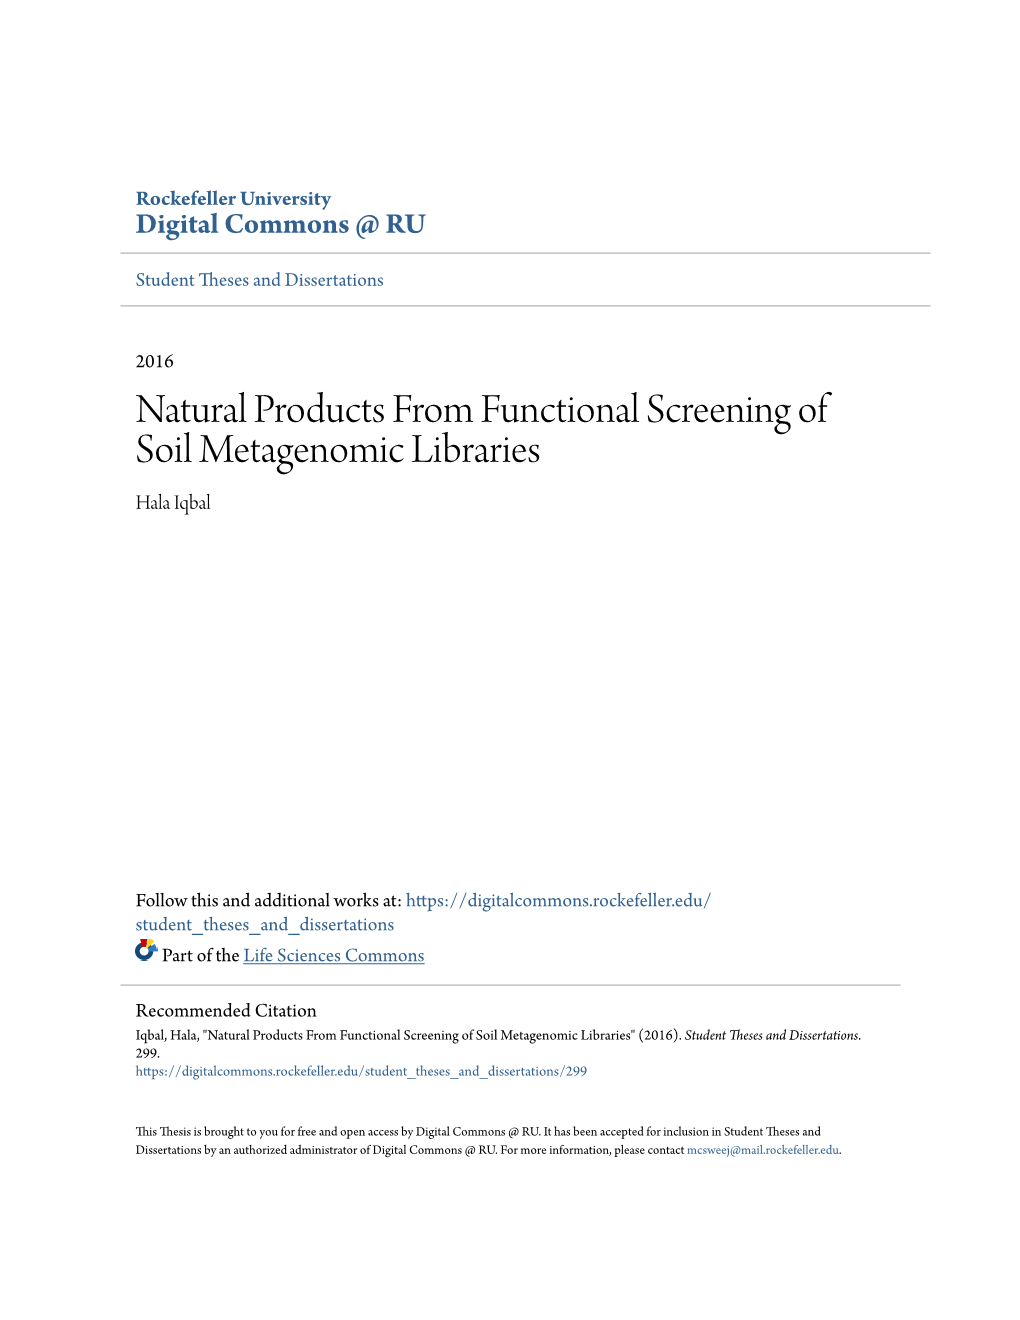 Natural Products from Functional Screening of Soil Metagenomic Libraries Hala Iqbal